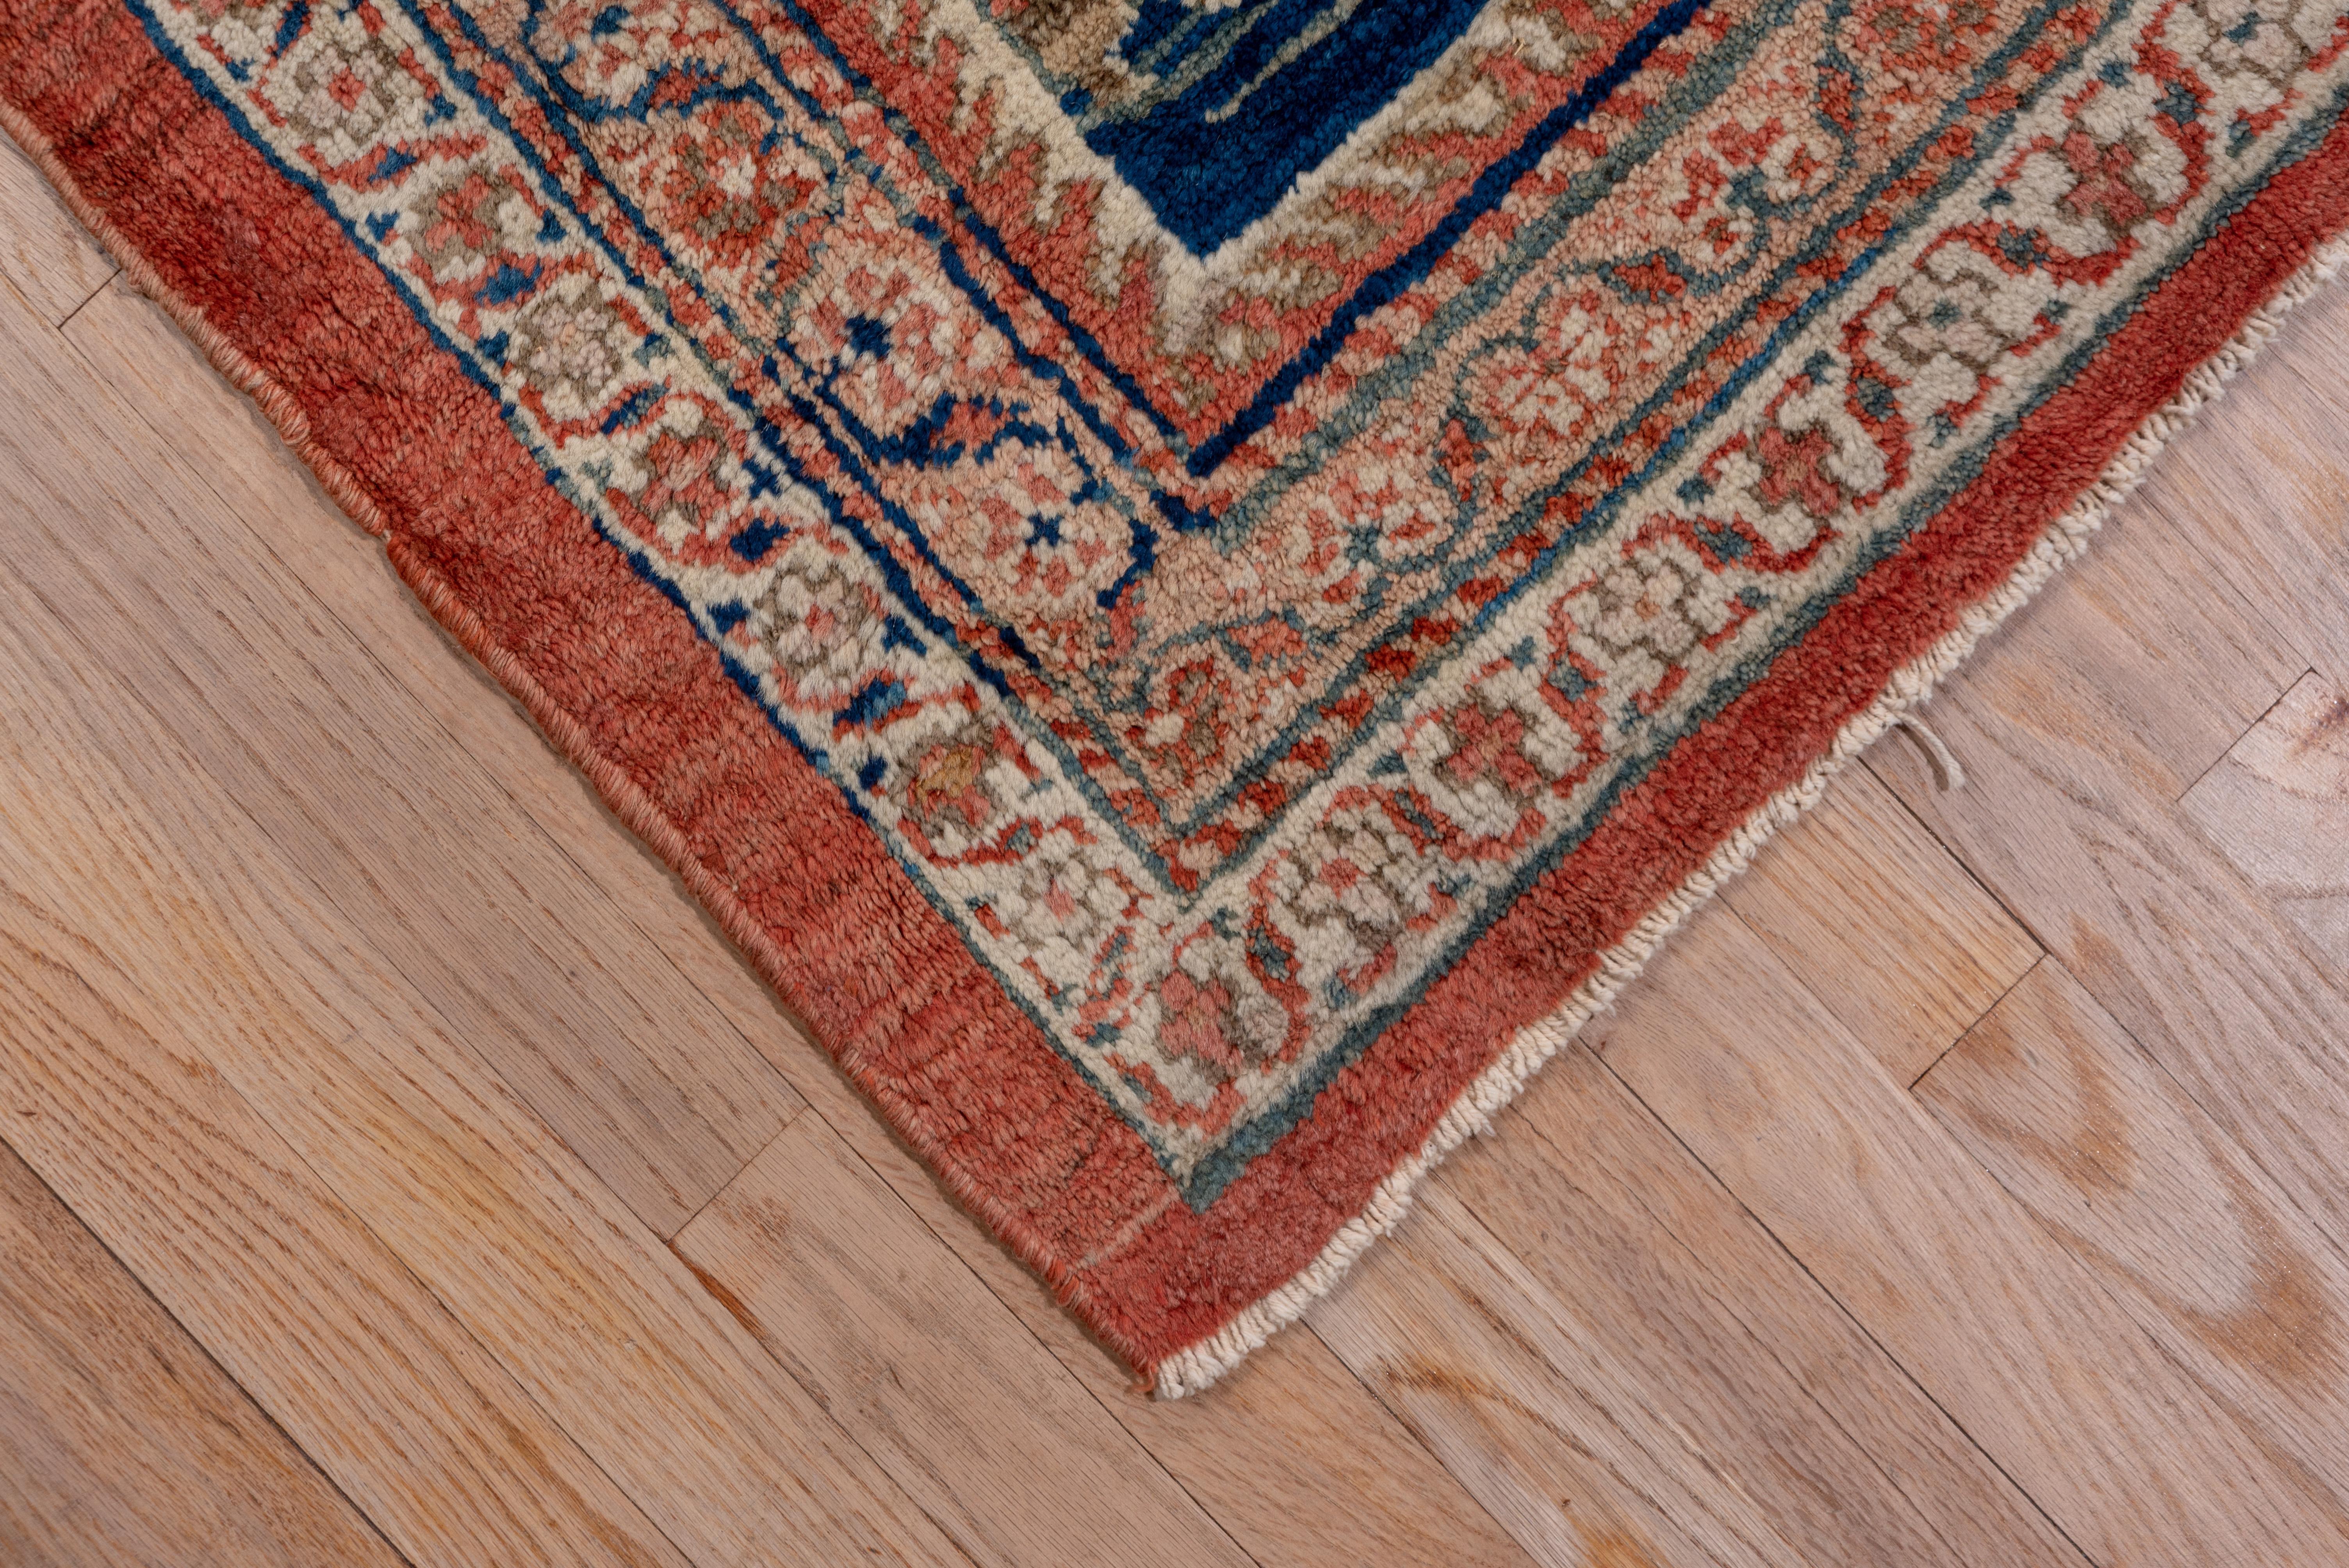 Hand-Knotted Magnificent Antique Persian Sultanabad Carpet, Bright Orange & Red Allover Field